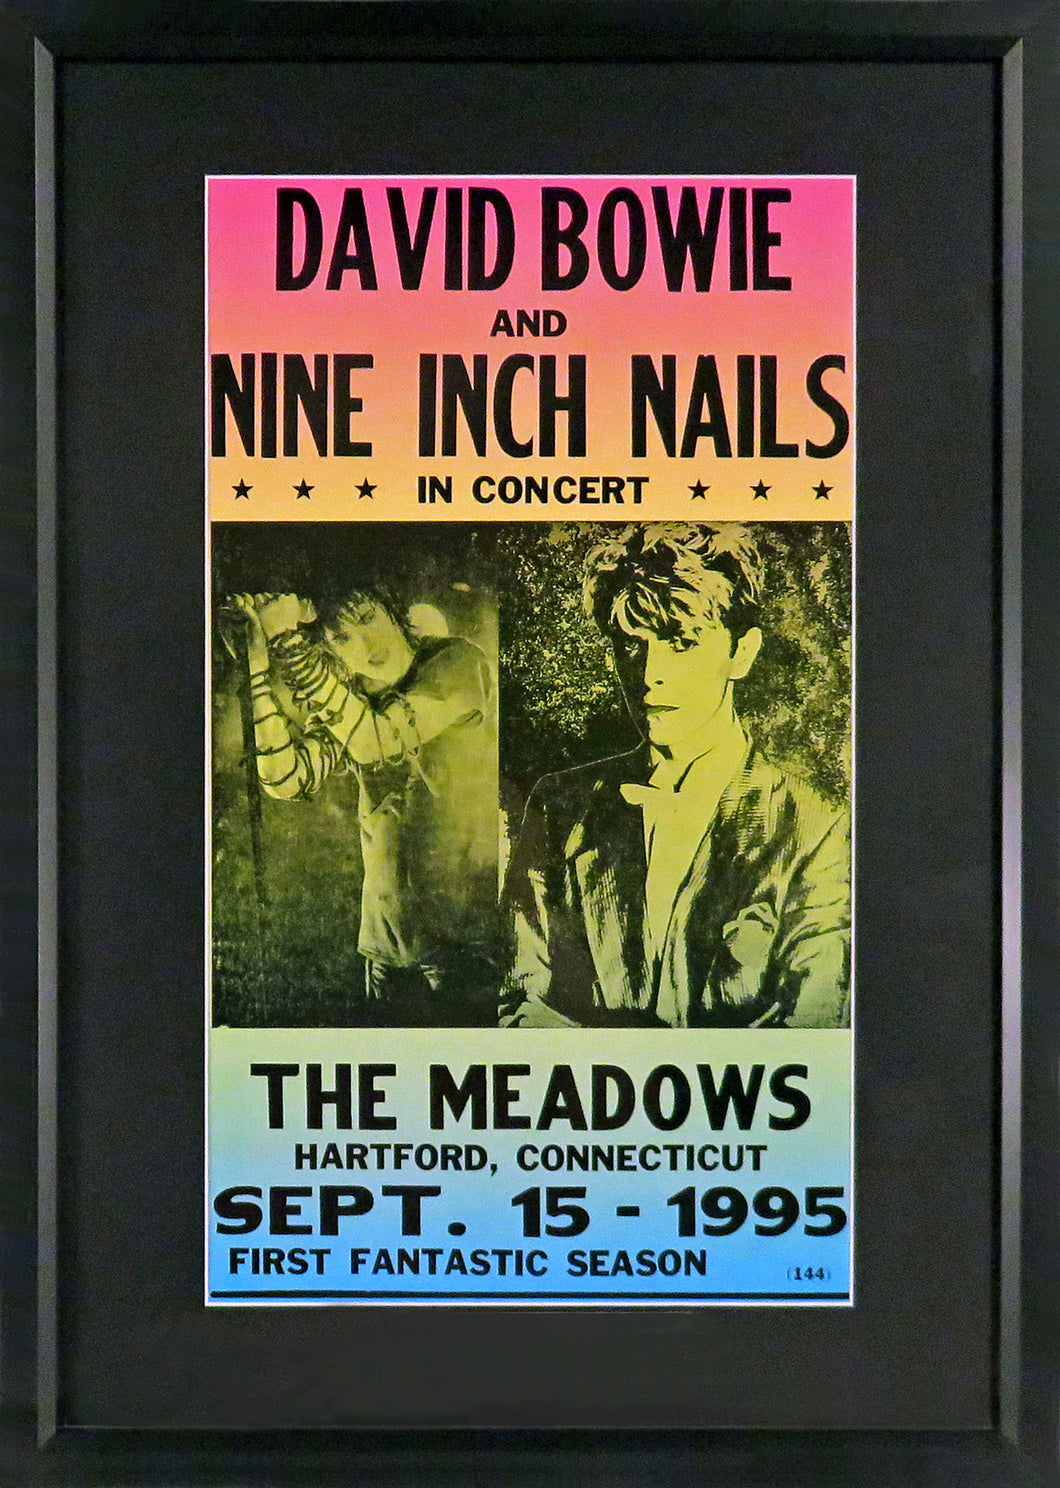 David Bowie and Nine Inch Nails Framed Concert Poster (Engraved Series)